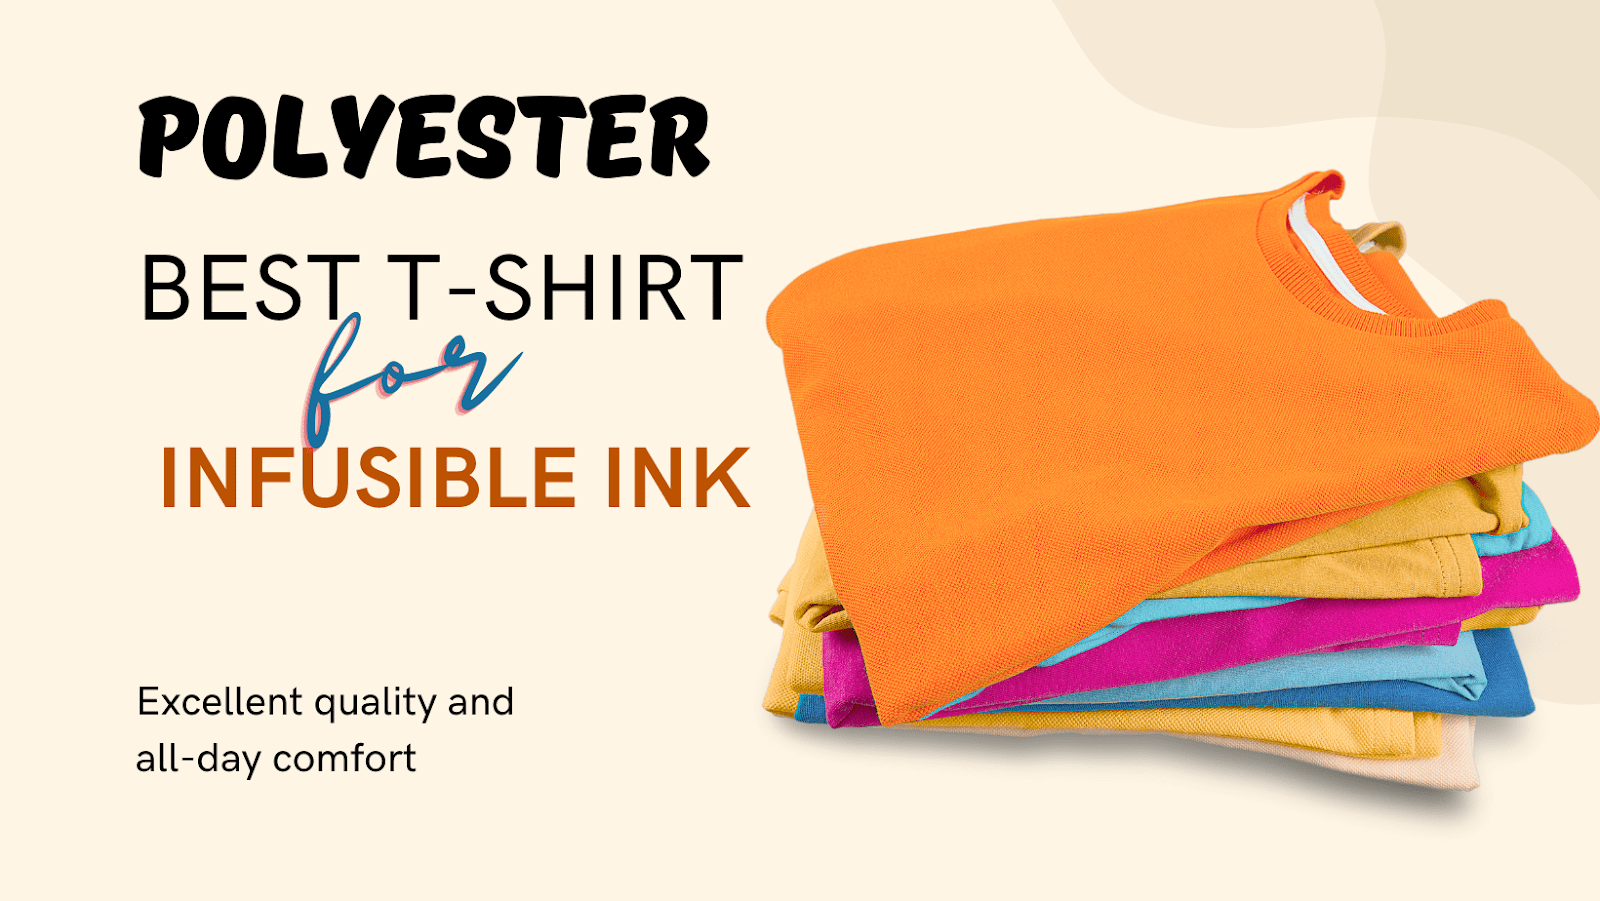 The Best Fabric for Infusible Ink